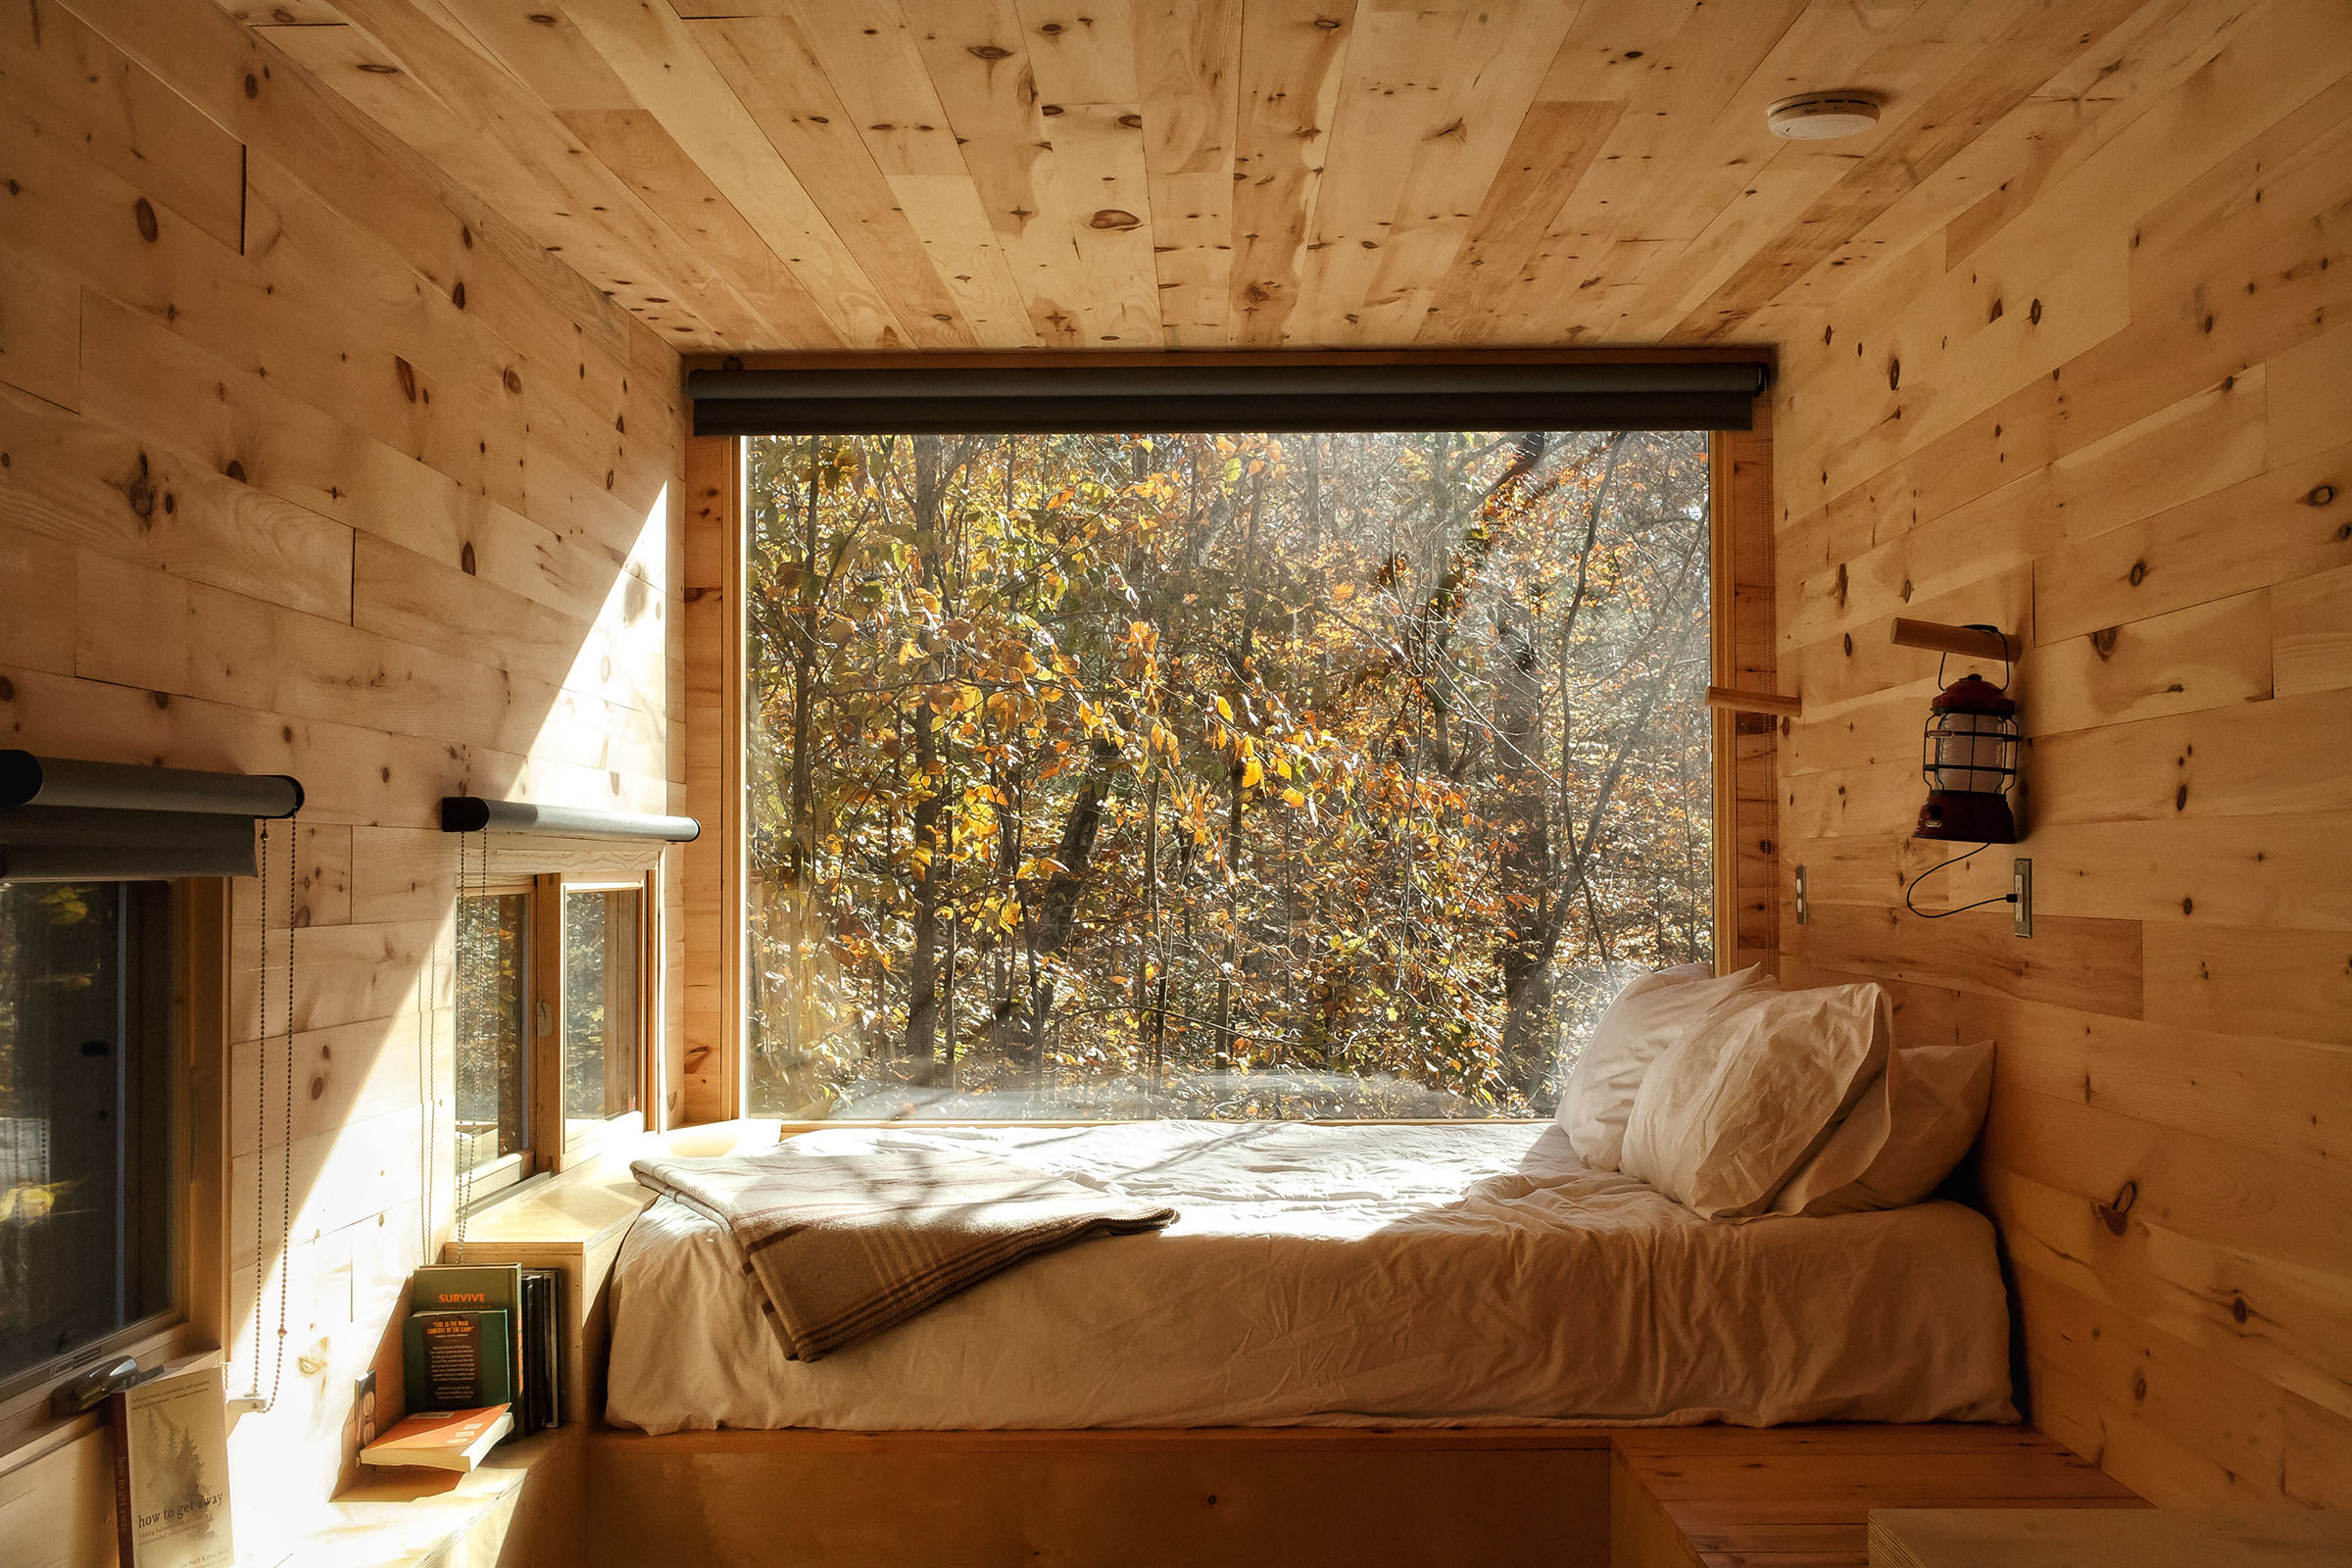 The view through a window to a lush green outdoor scene above a white bed with pine walls